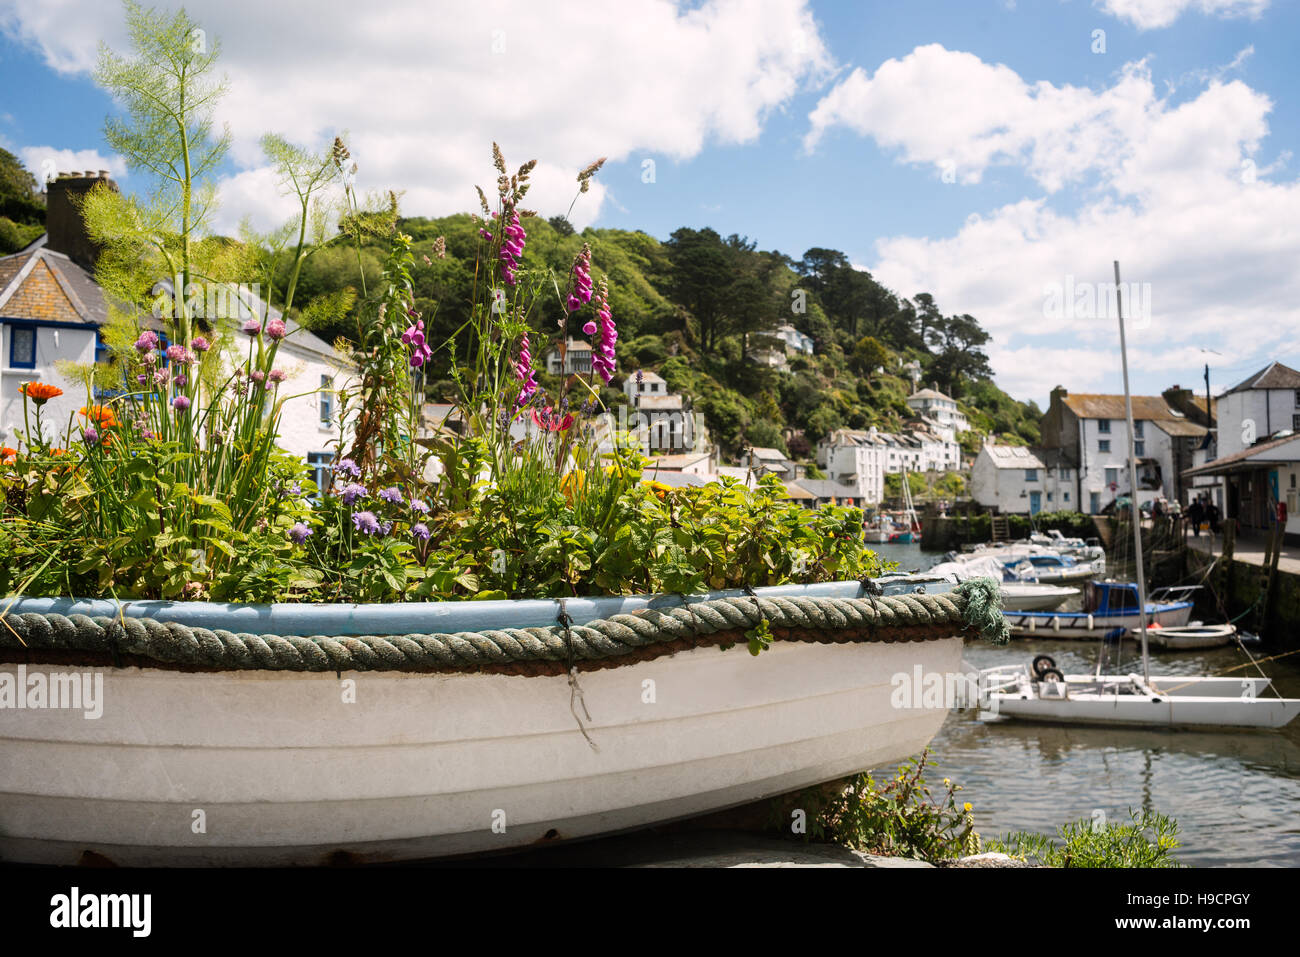 Old boat filled with flowers in summer at resort in Cornwall, UK Stock Photo